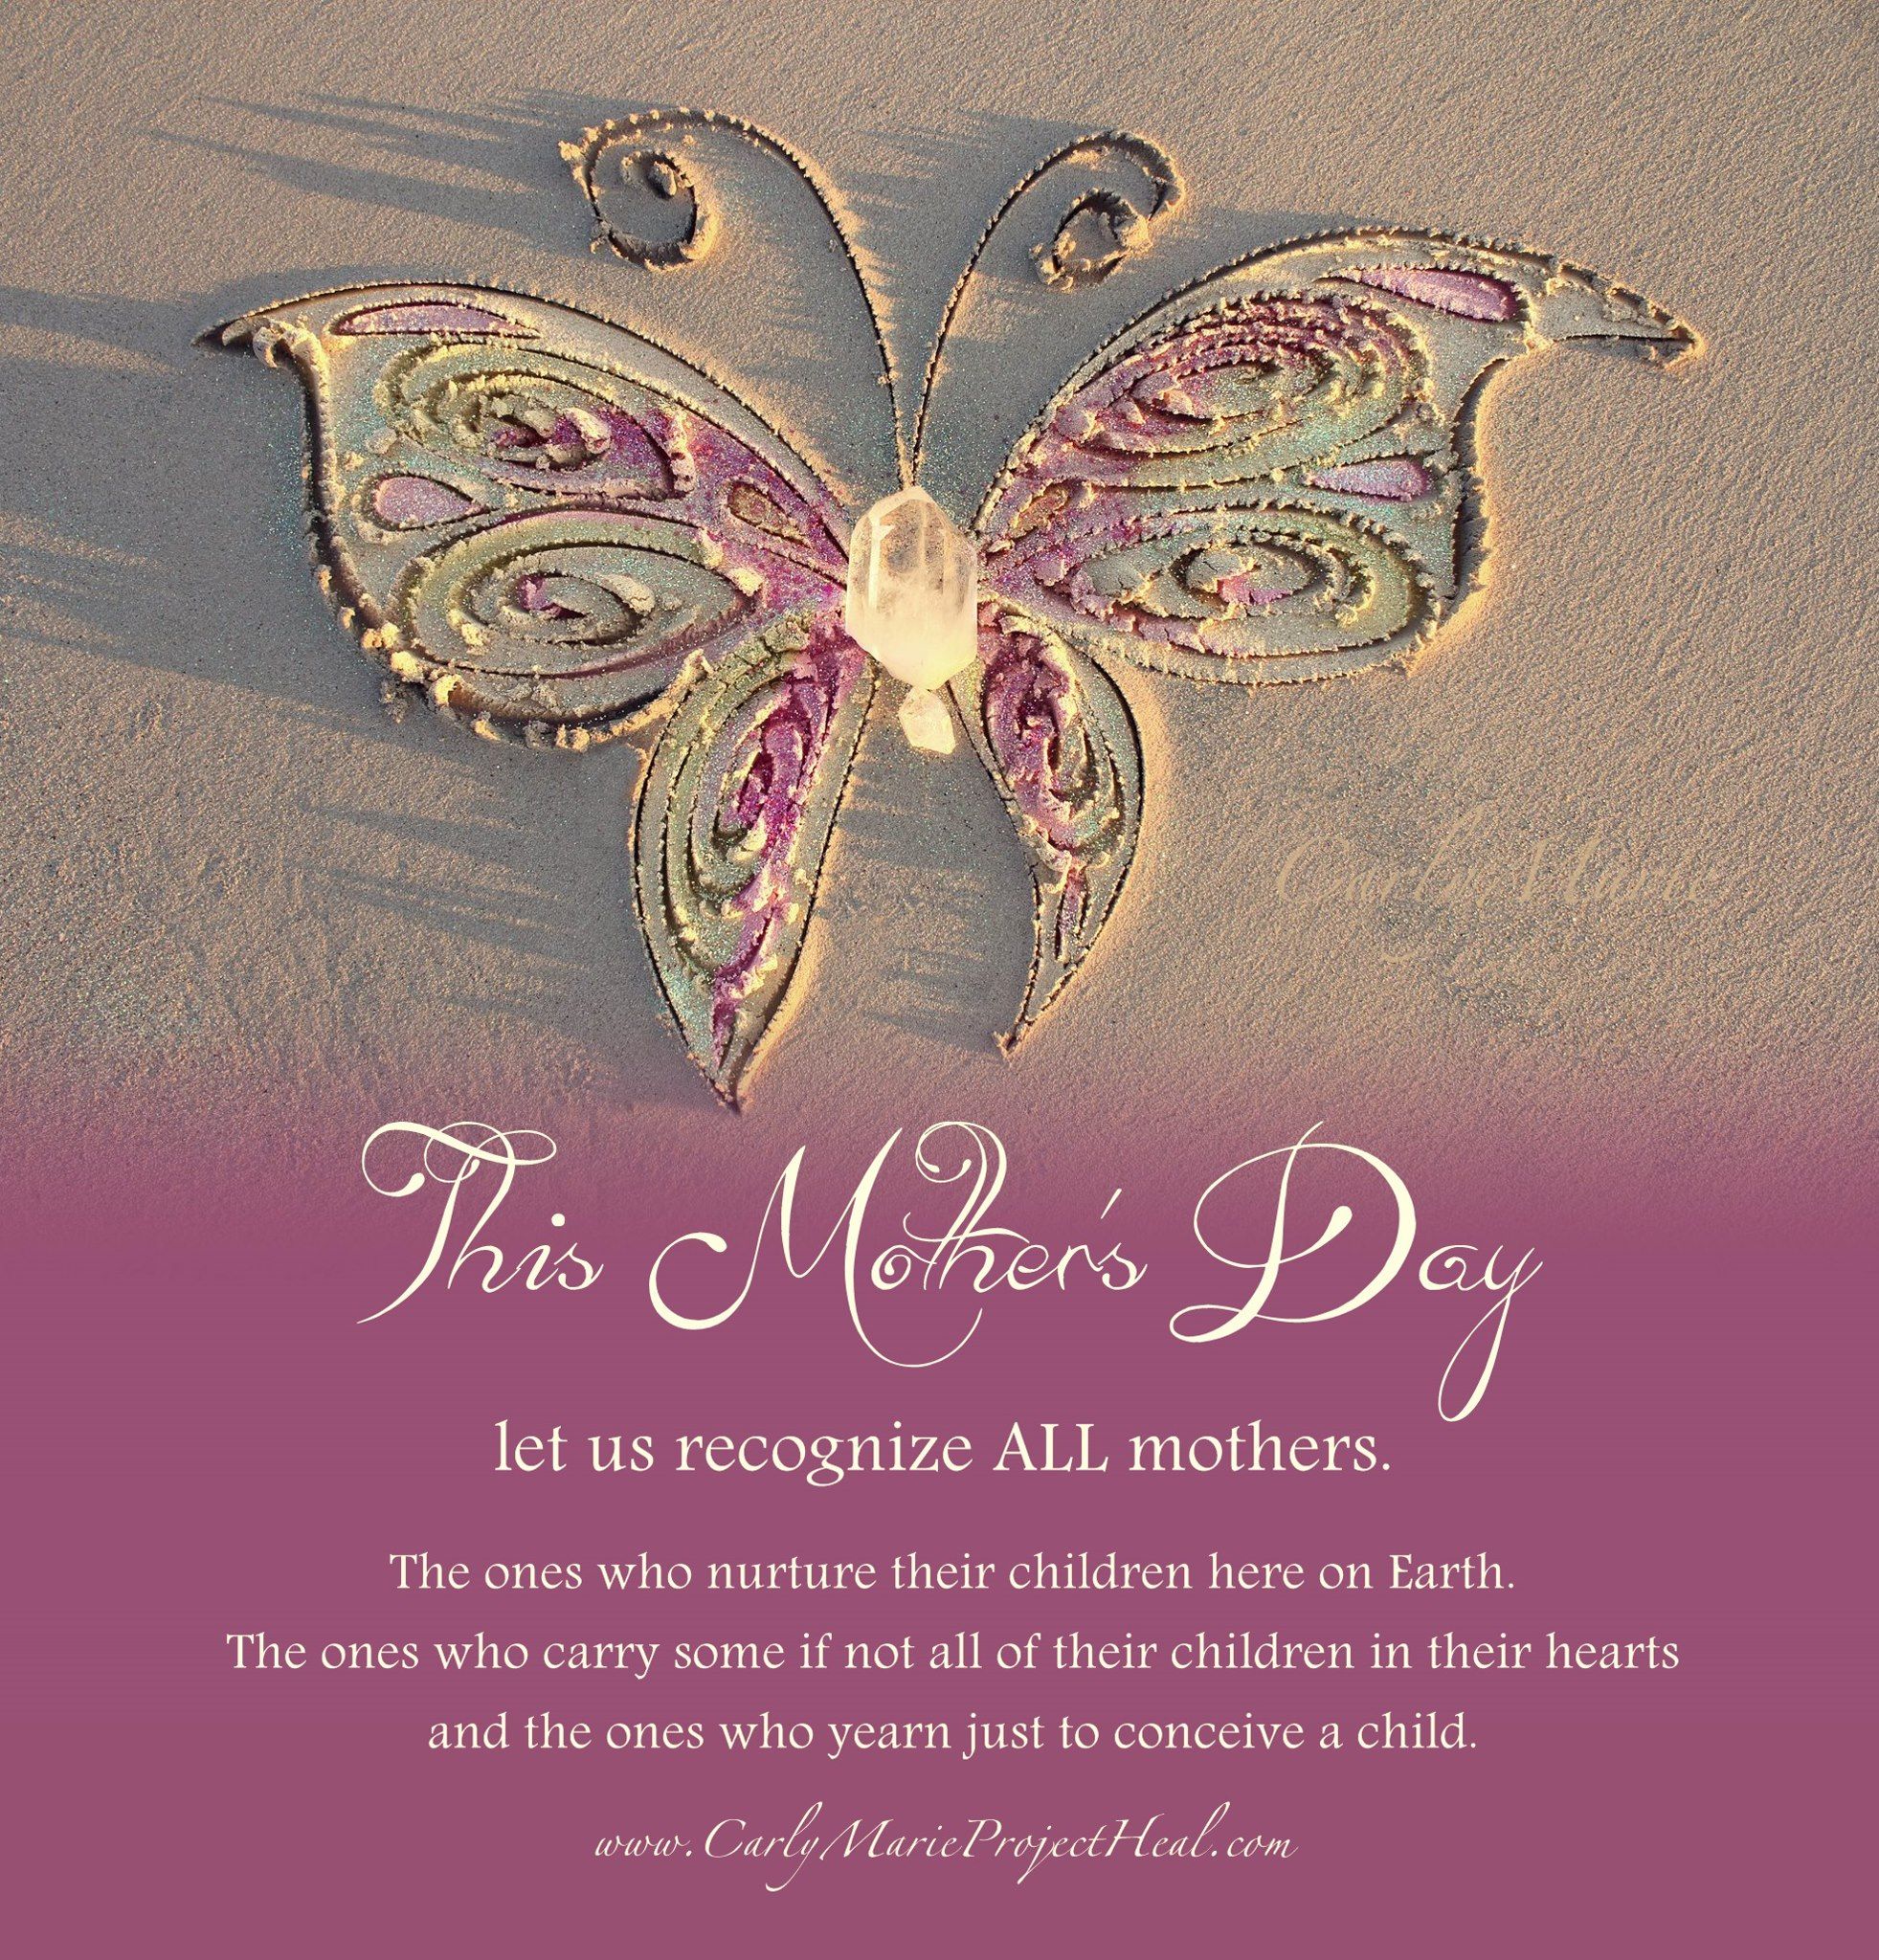 To all the Mothers